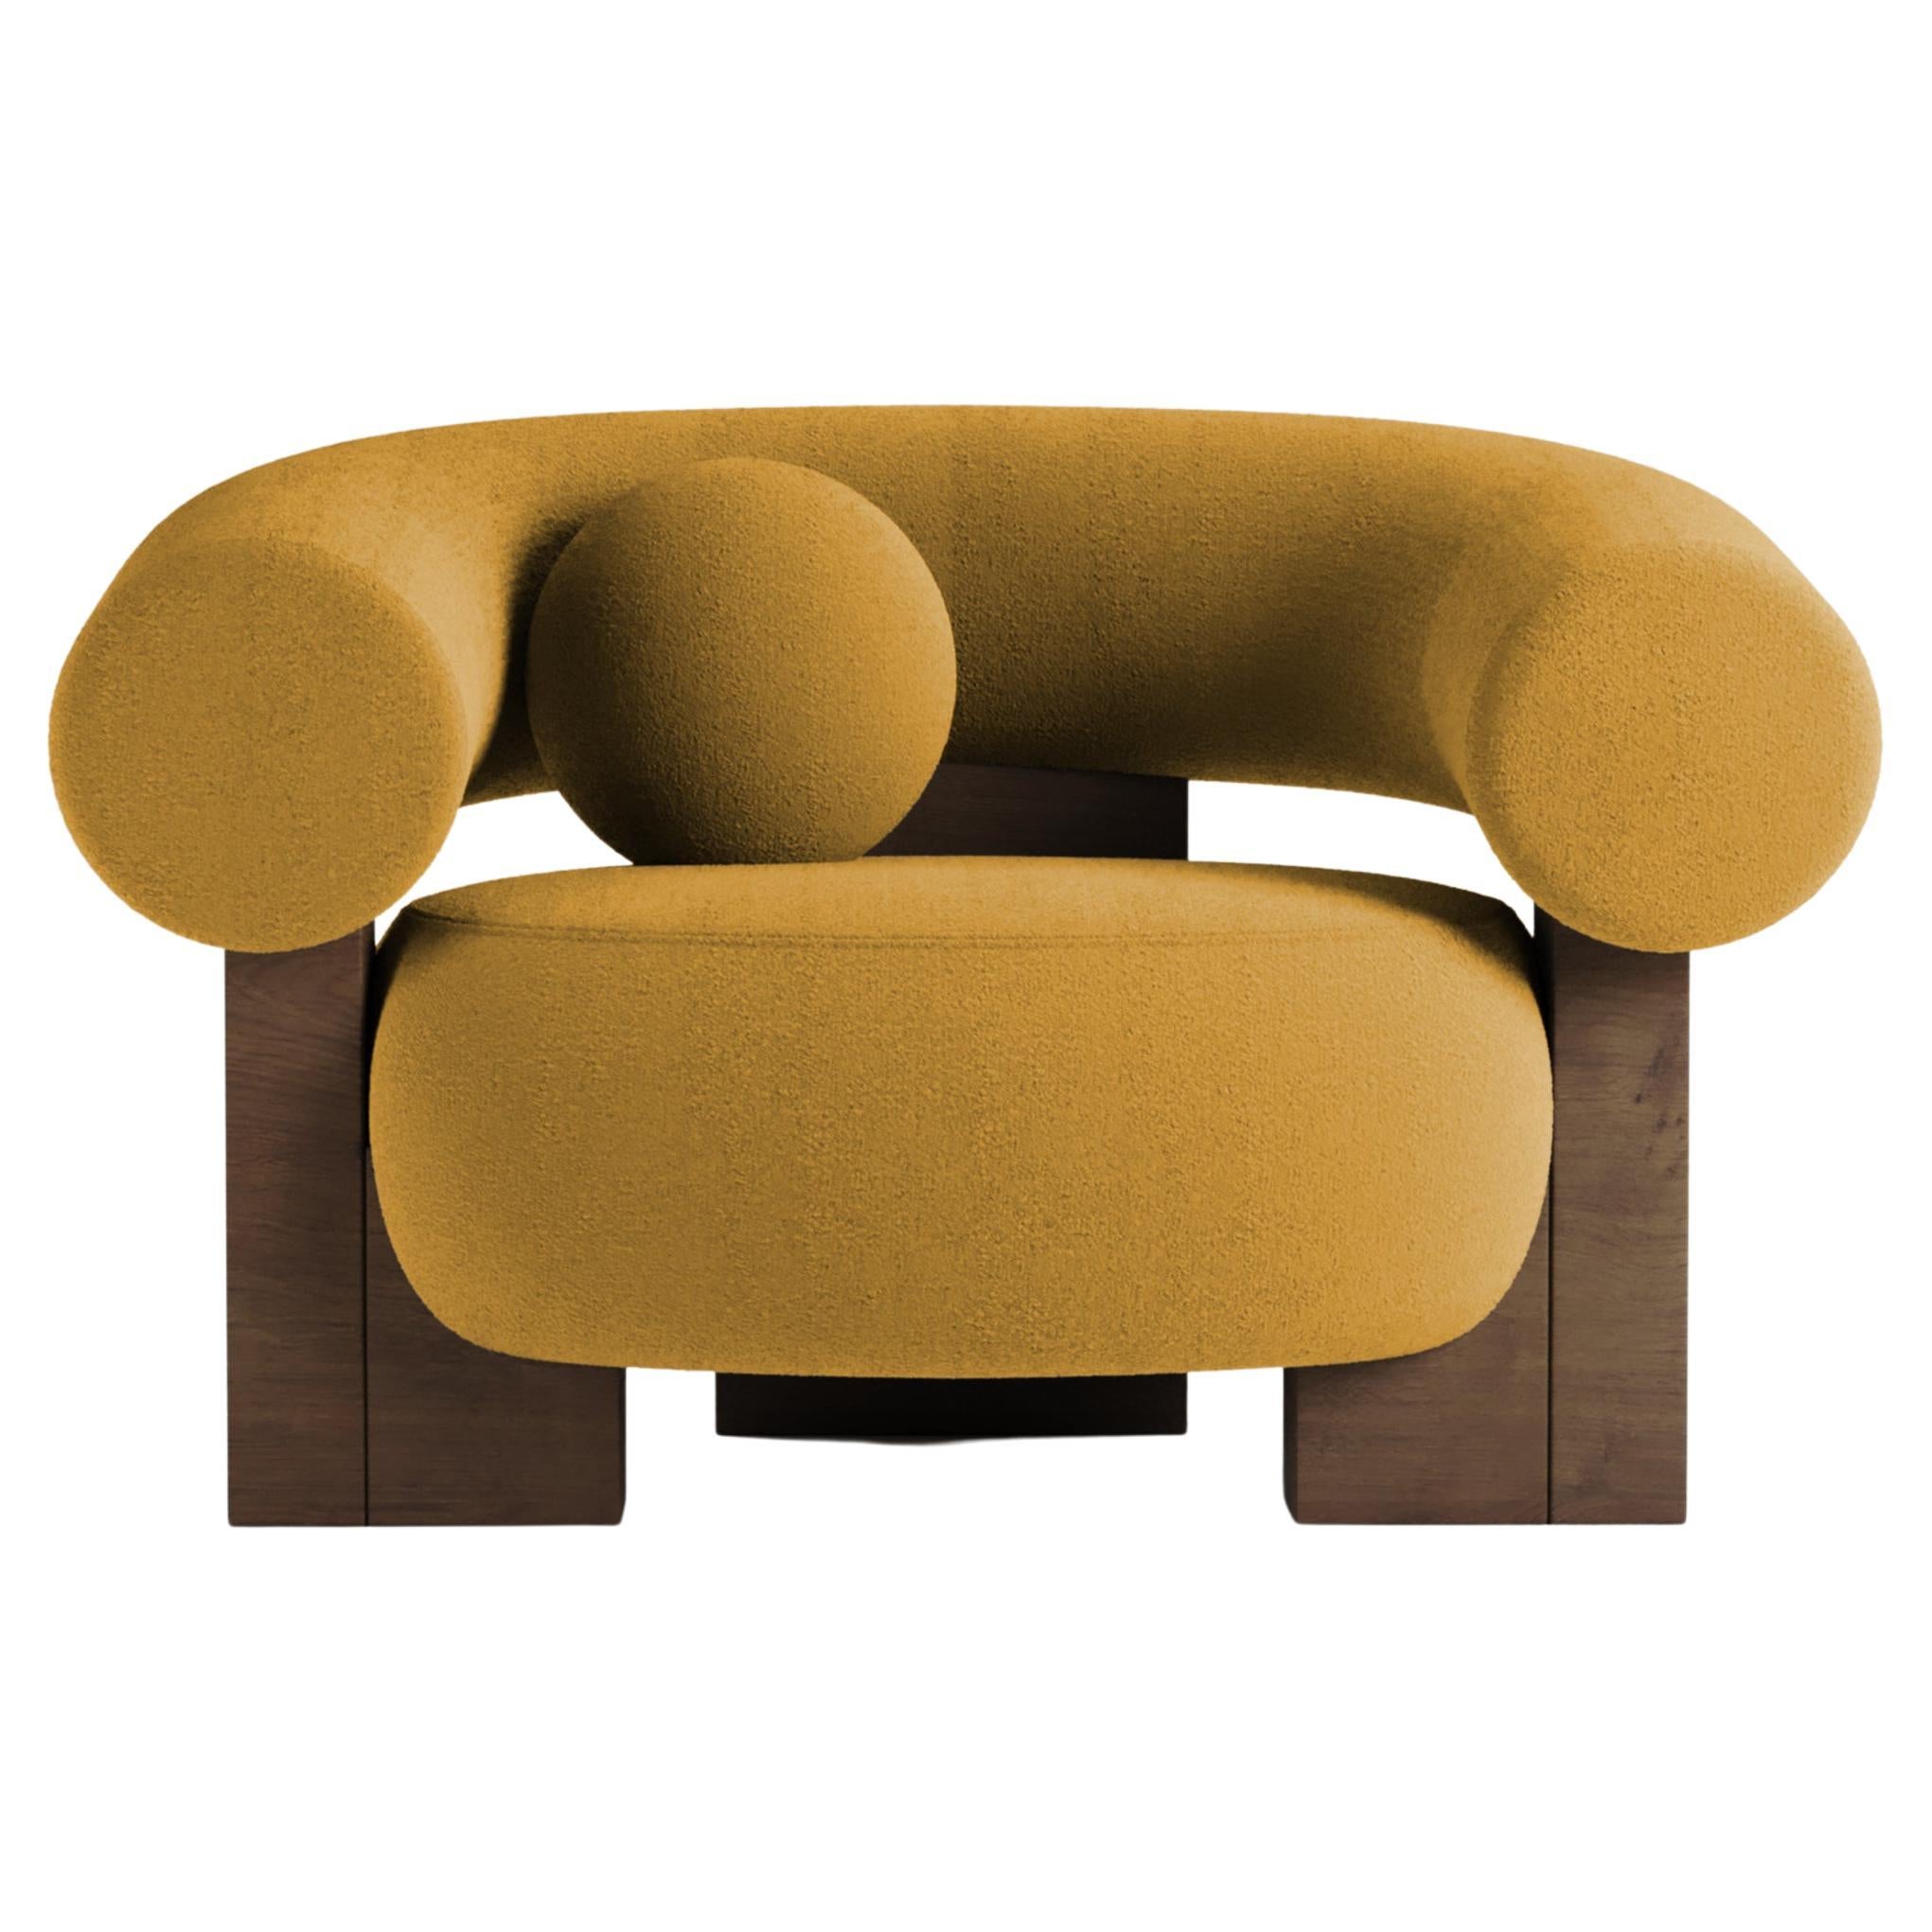 Collector Contemporary Modern Cassette Armchair in Boucle Mustard Smoked Oak